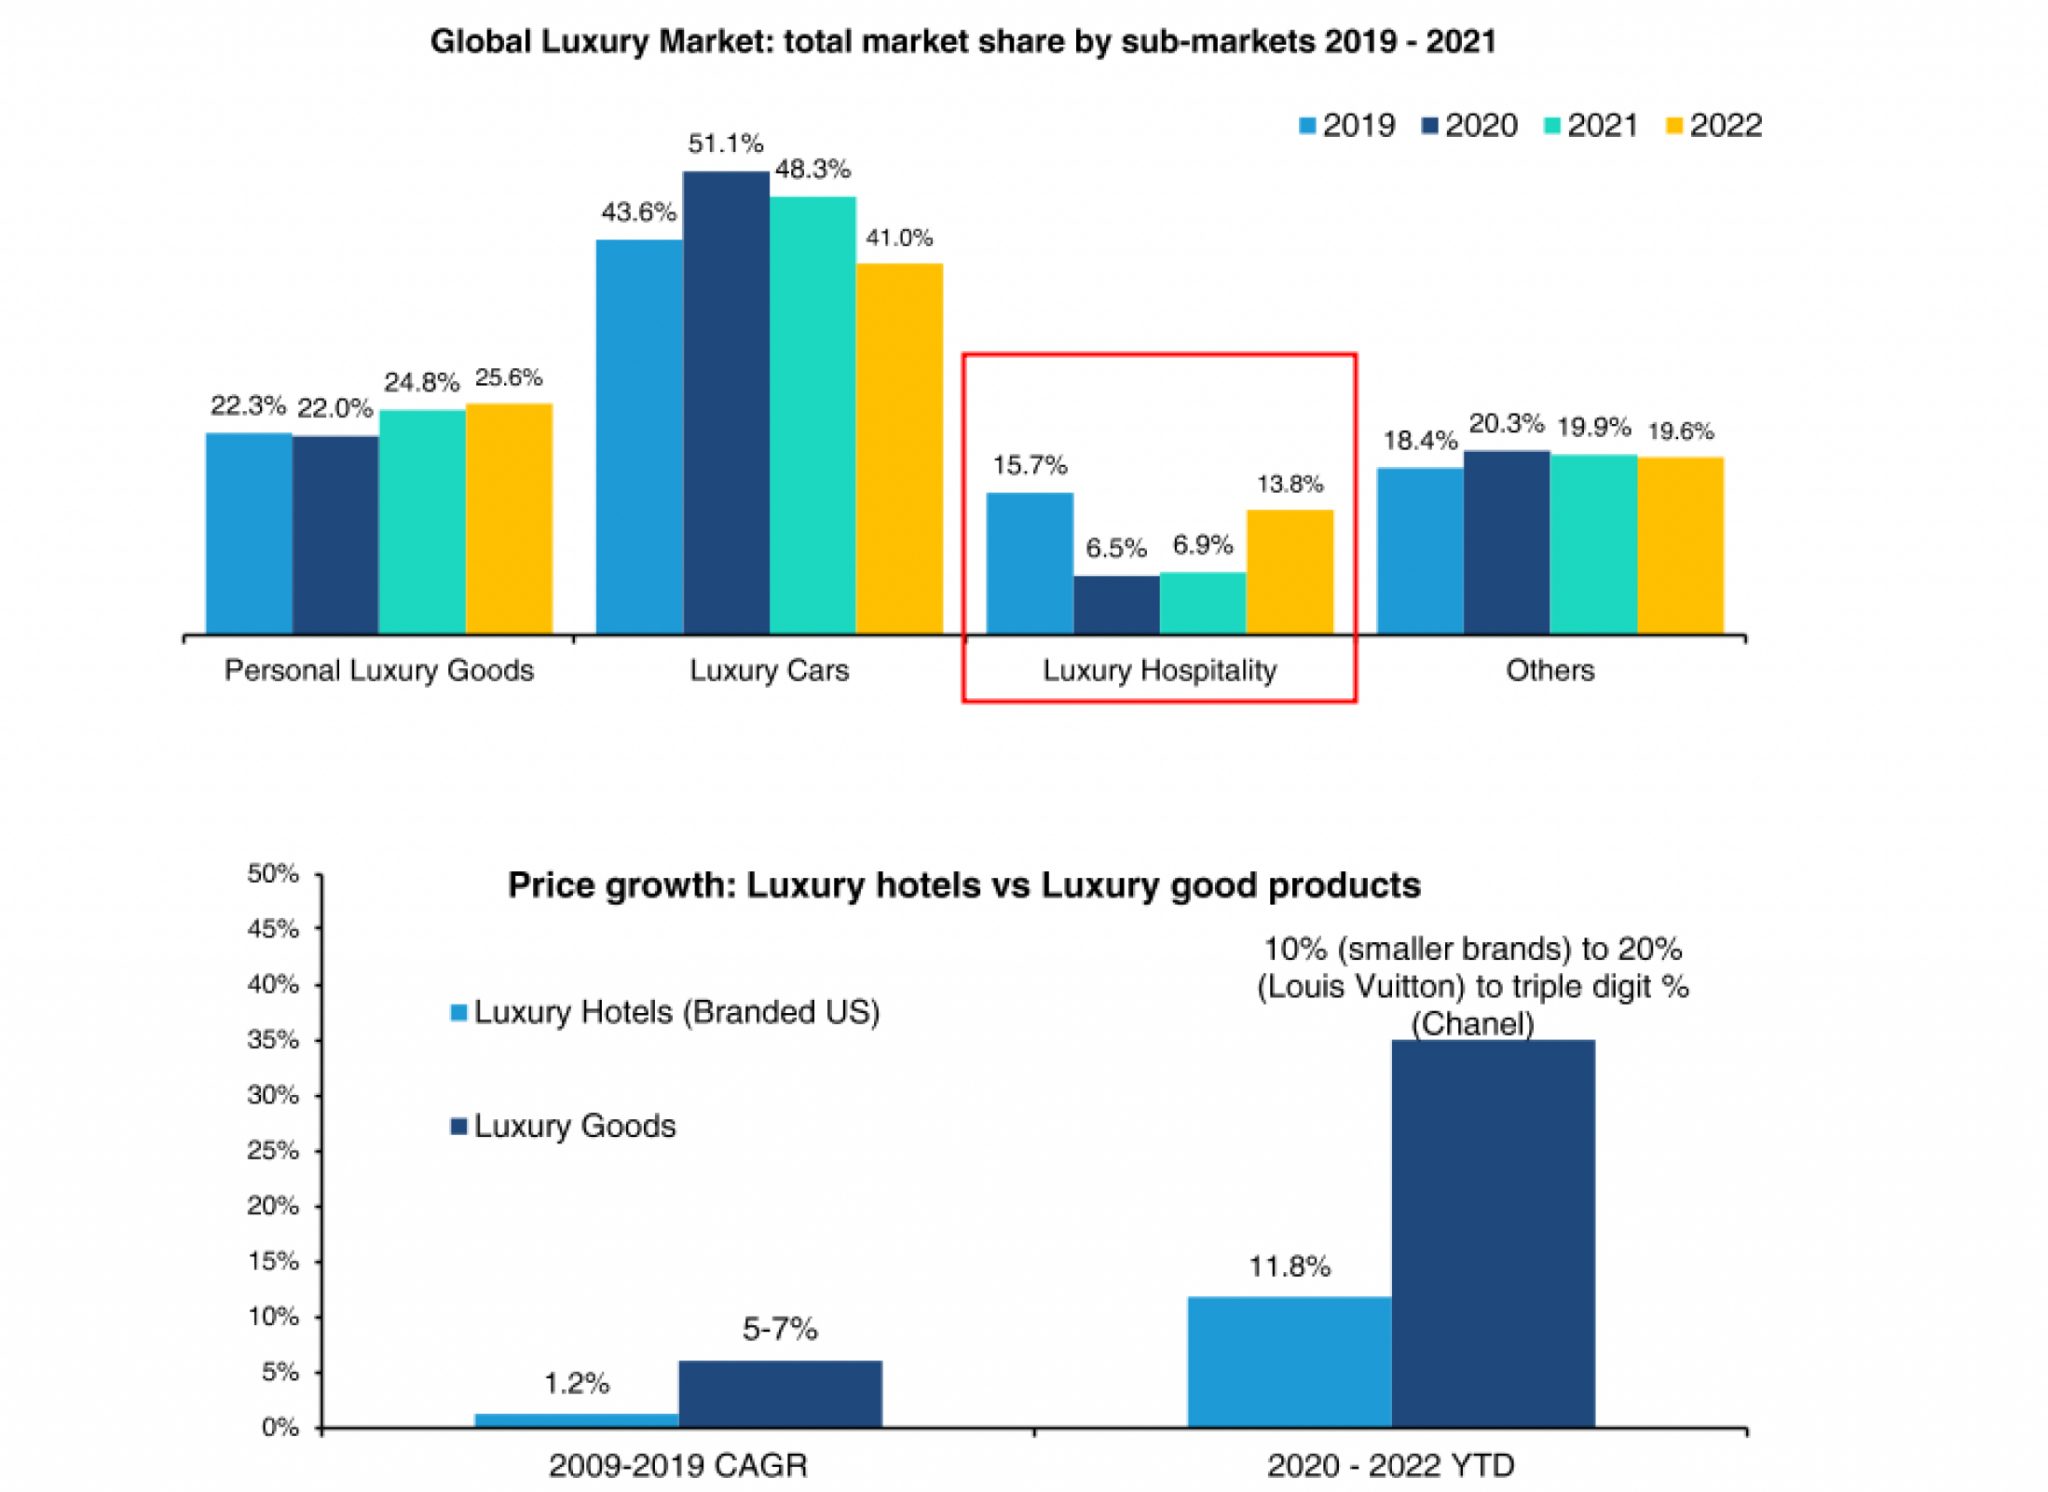 Luxury Hotels May Be Underpriced Relative to Other Luxuries